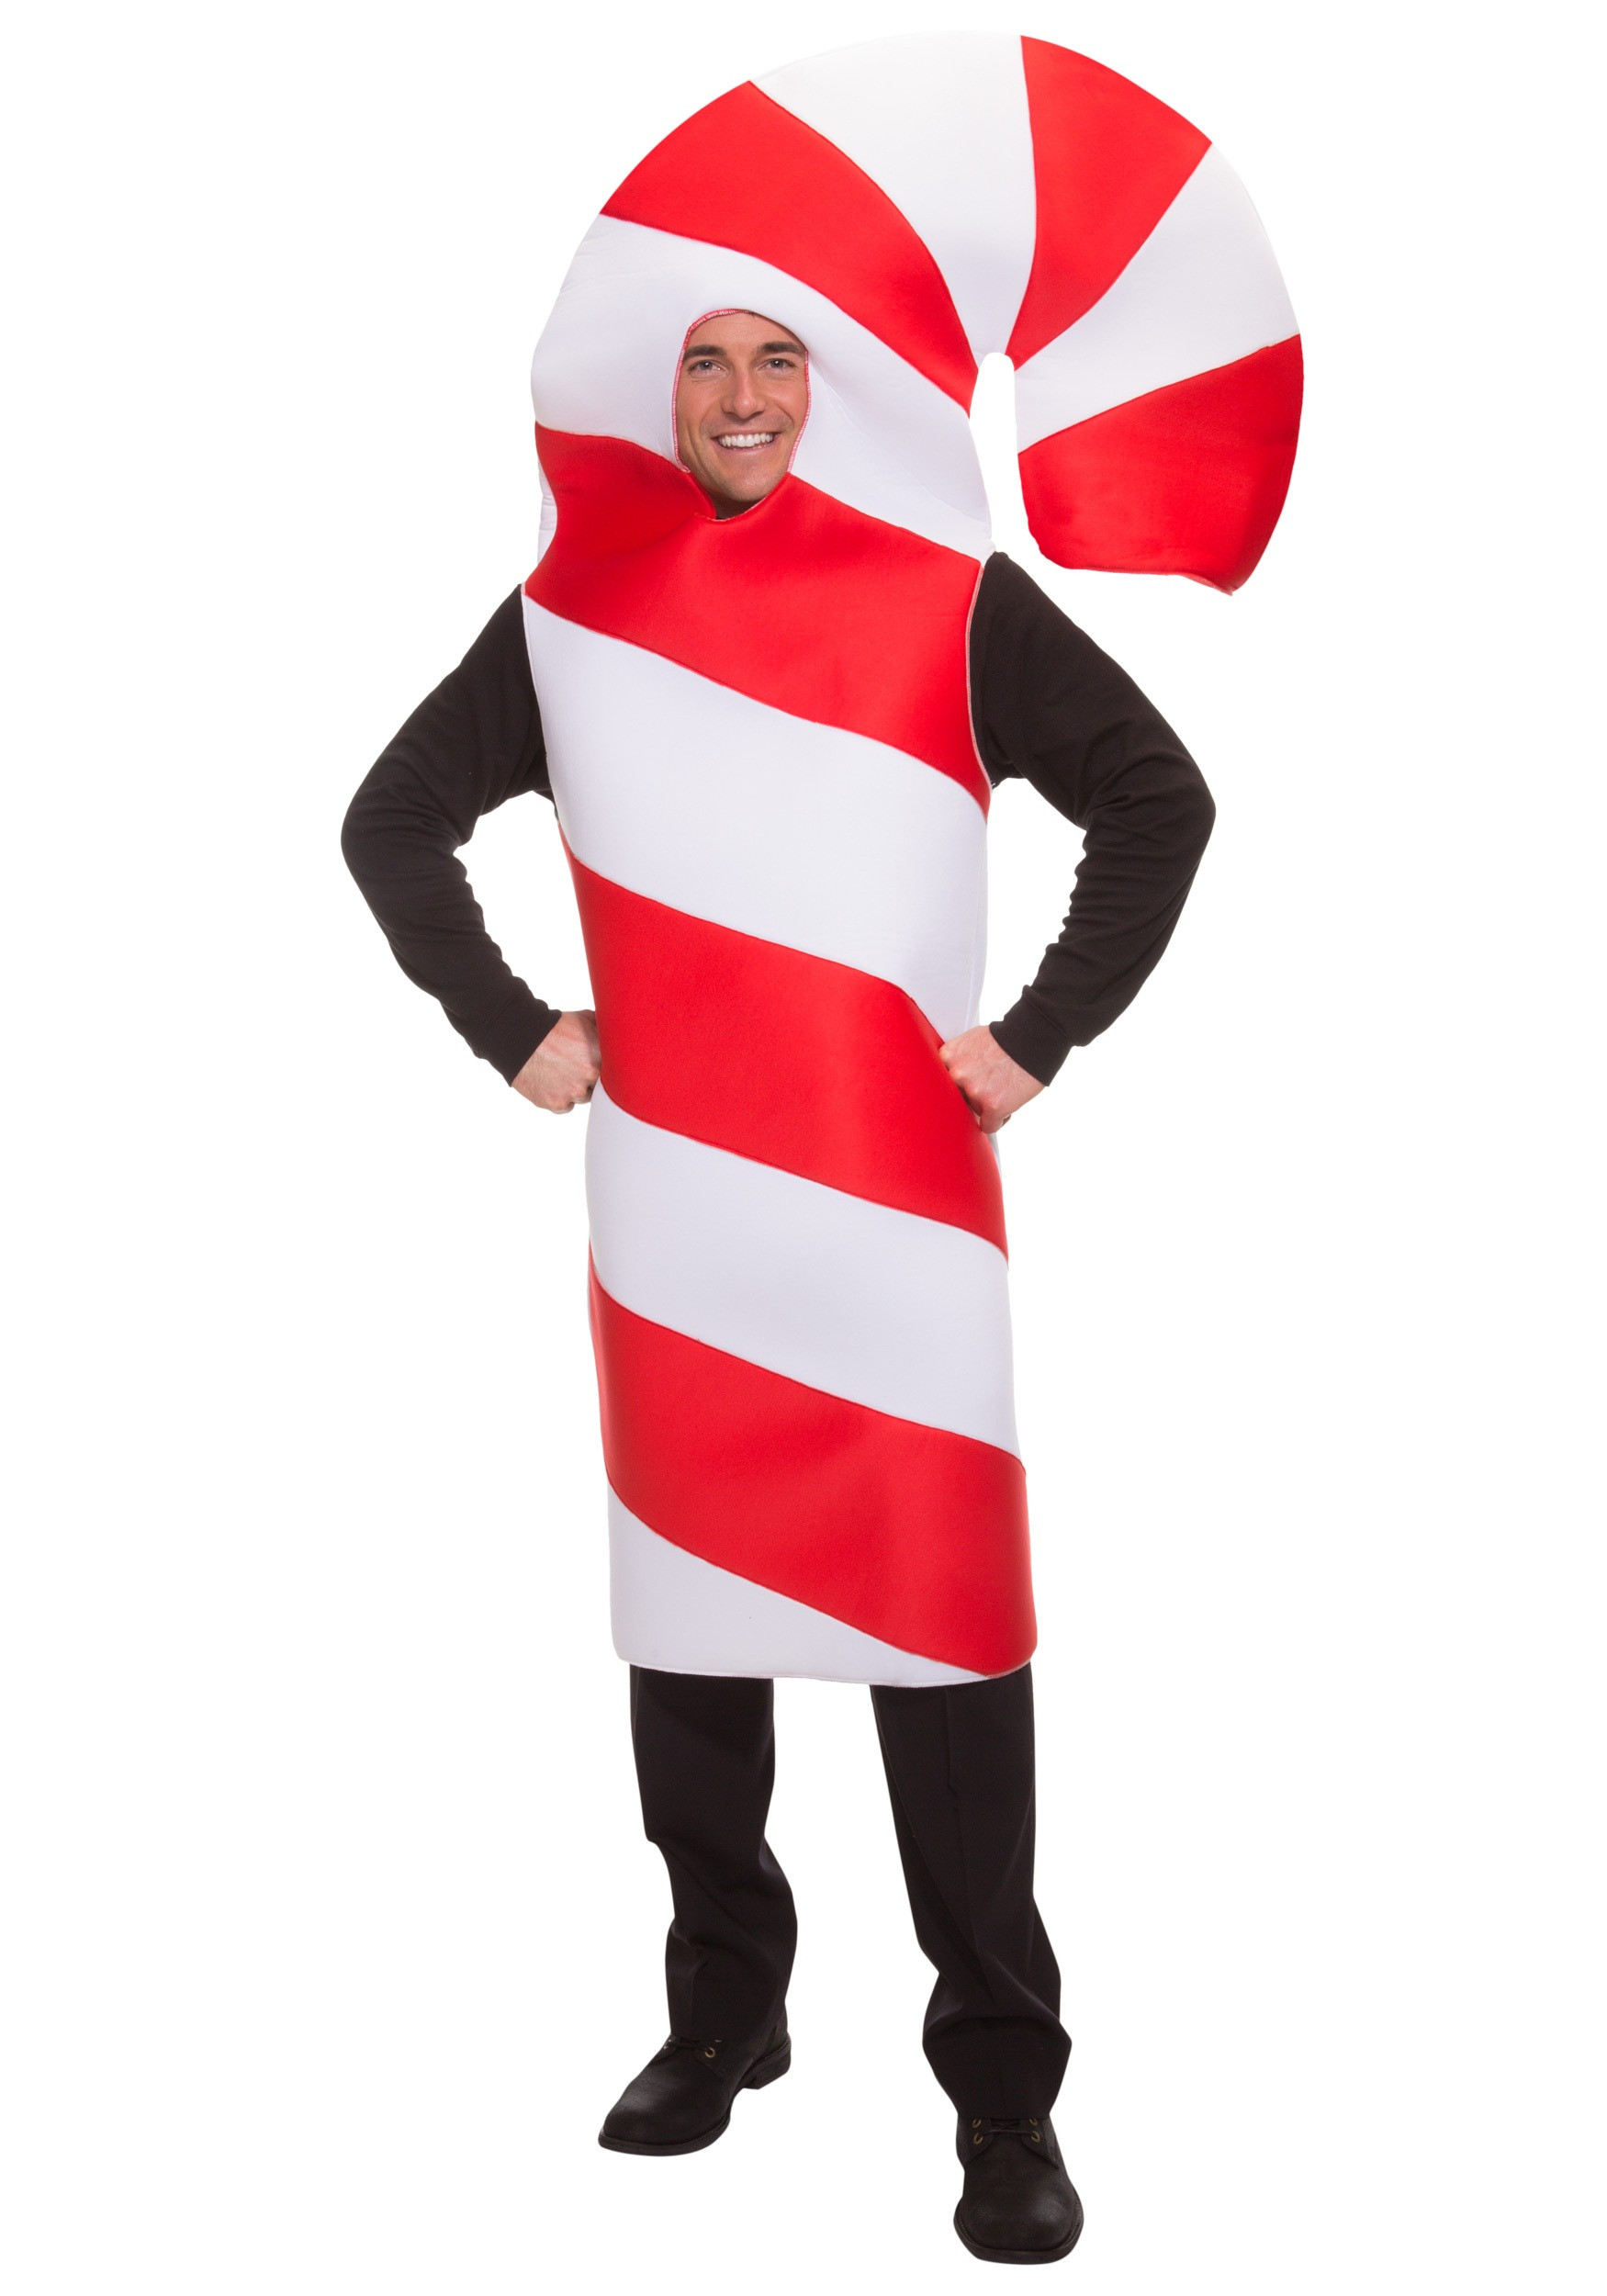 Christmas Candy Cane Costume
 Adult s Mens Christmas Holiday Novelty Candy Cane Suit